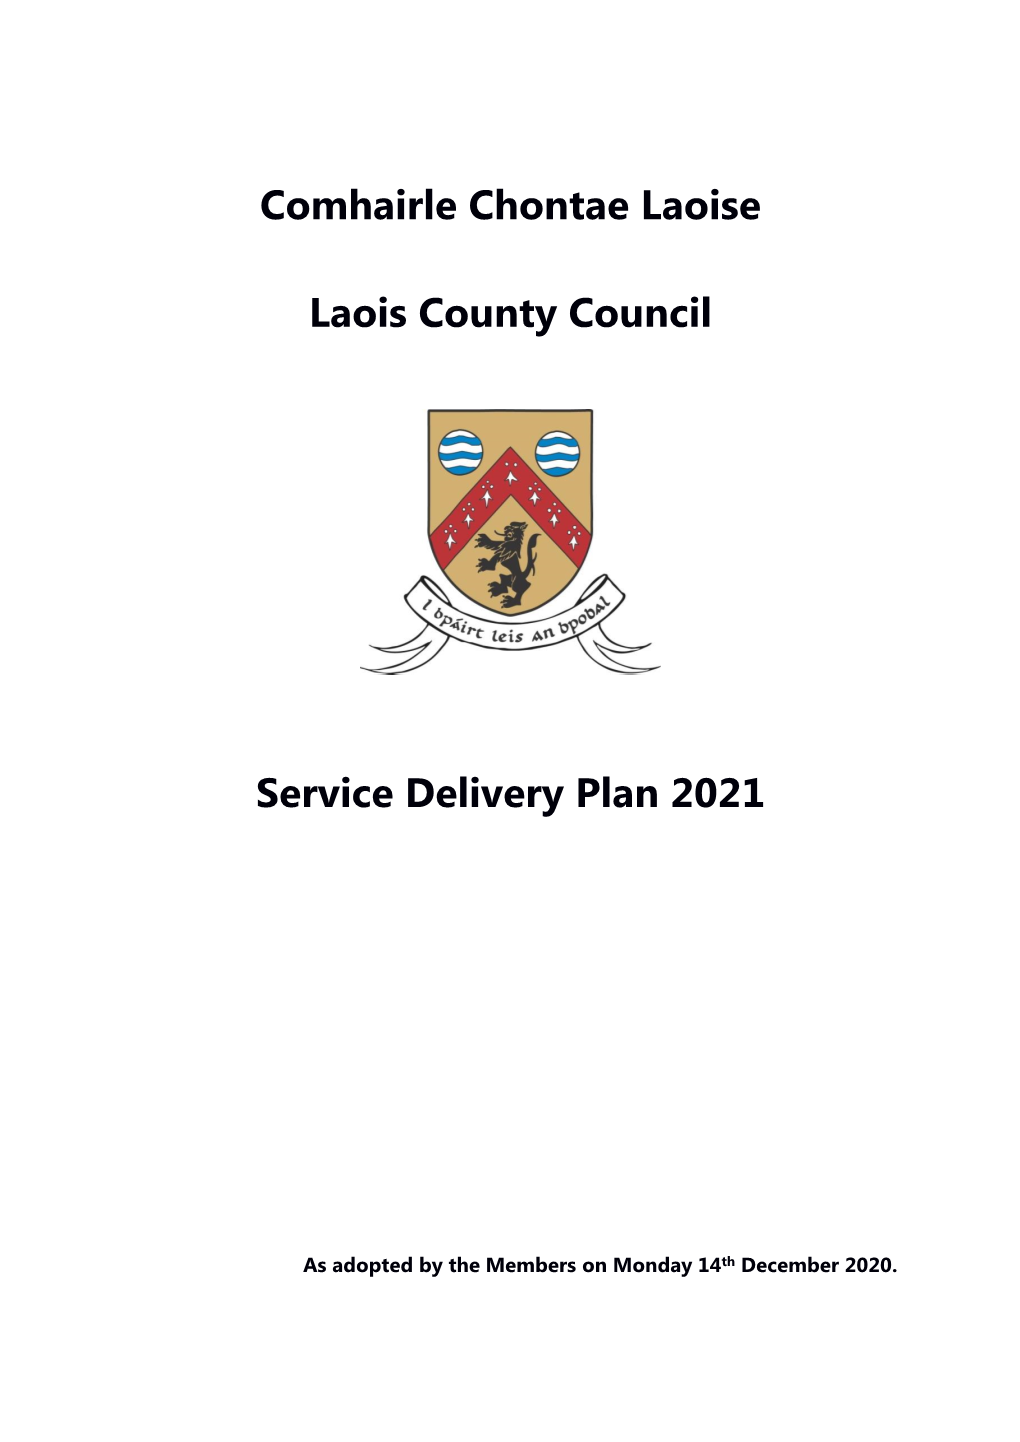 2021 Service Delivery Plan